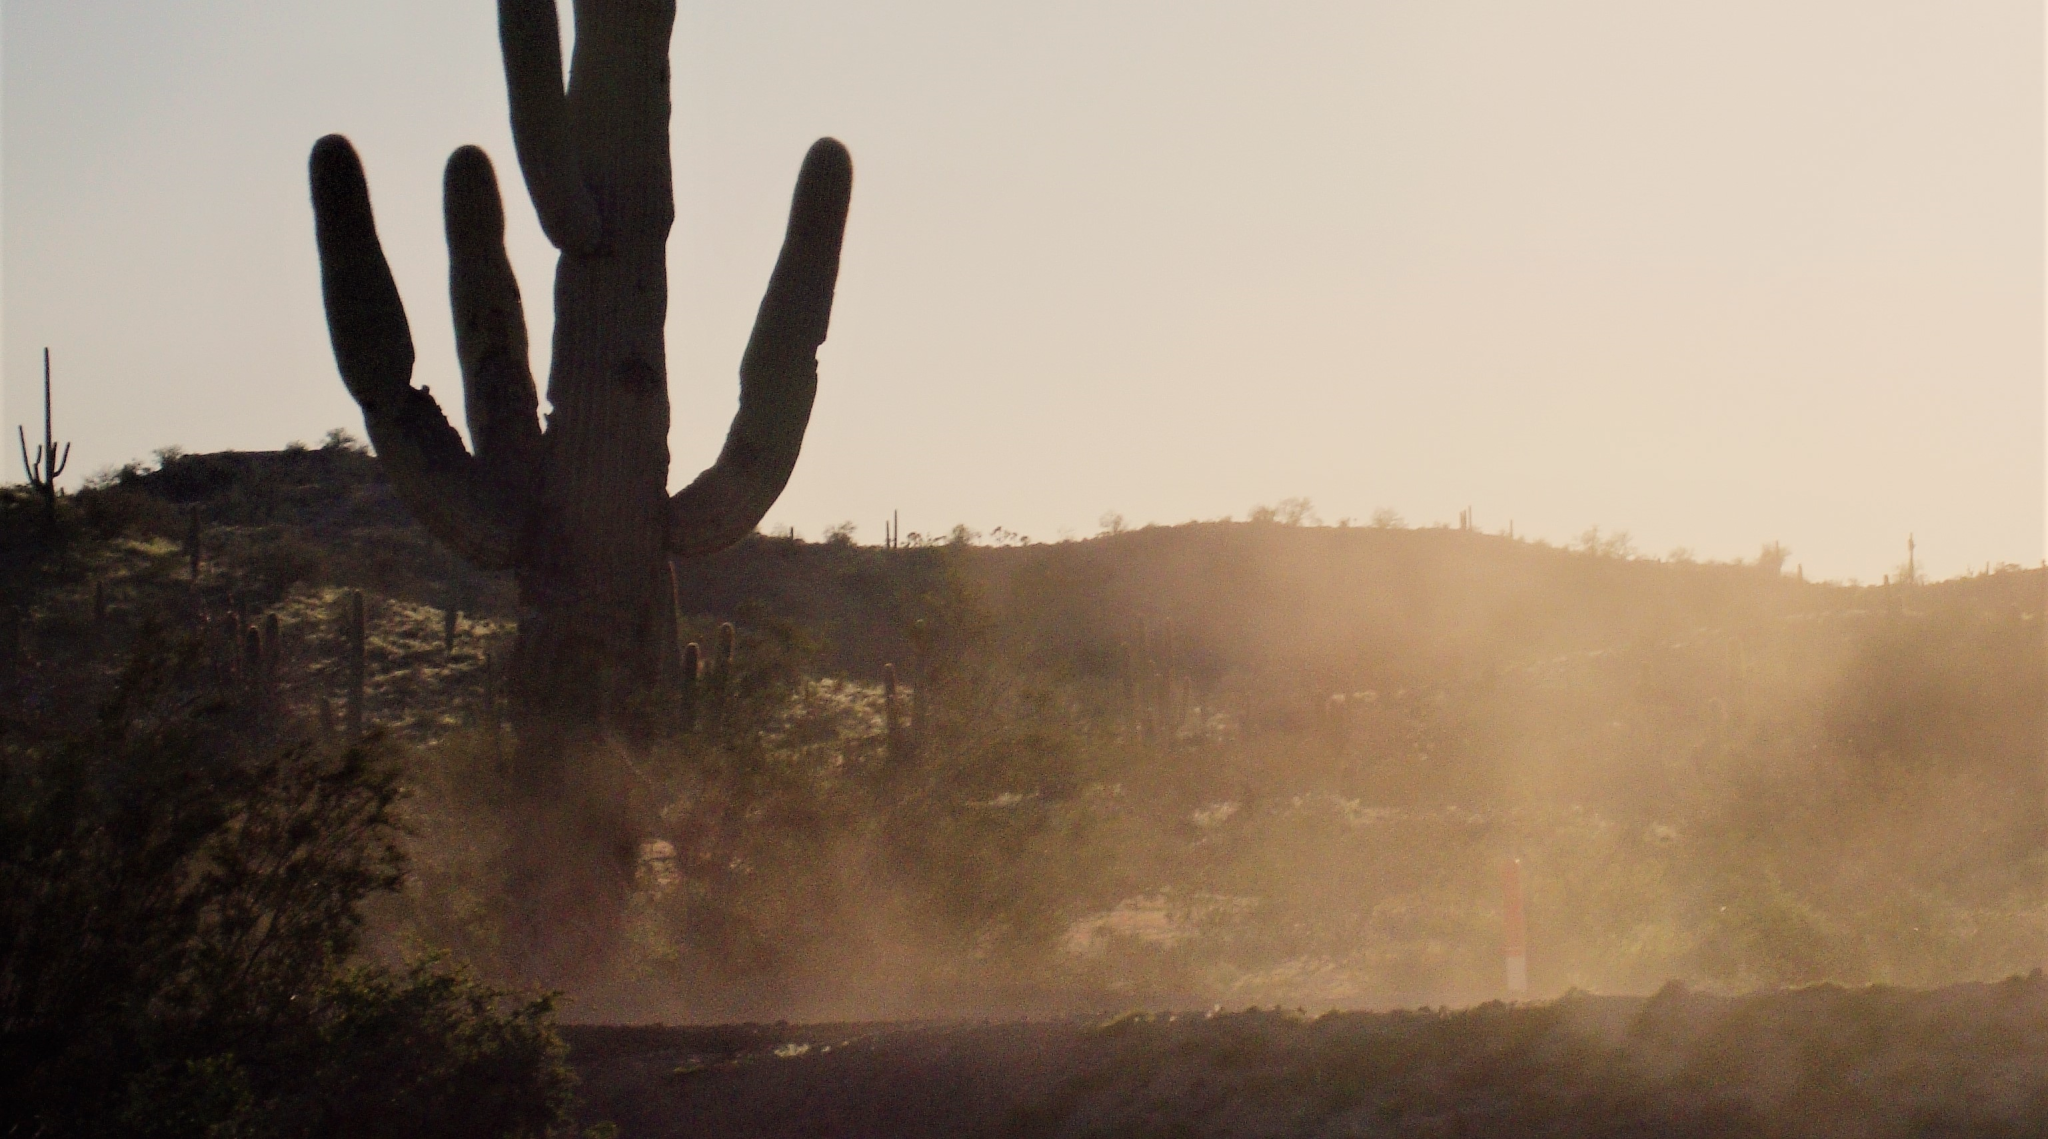 A cactus is silhouetted by swirling tan dust.